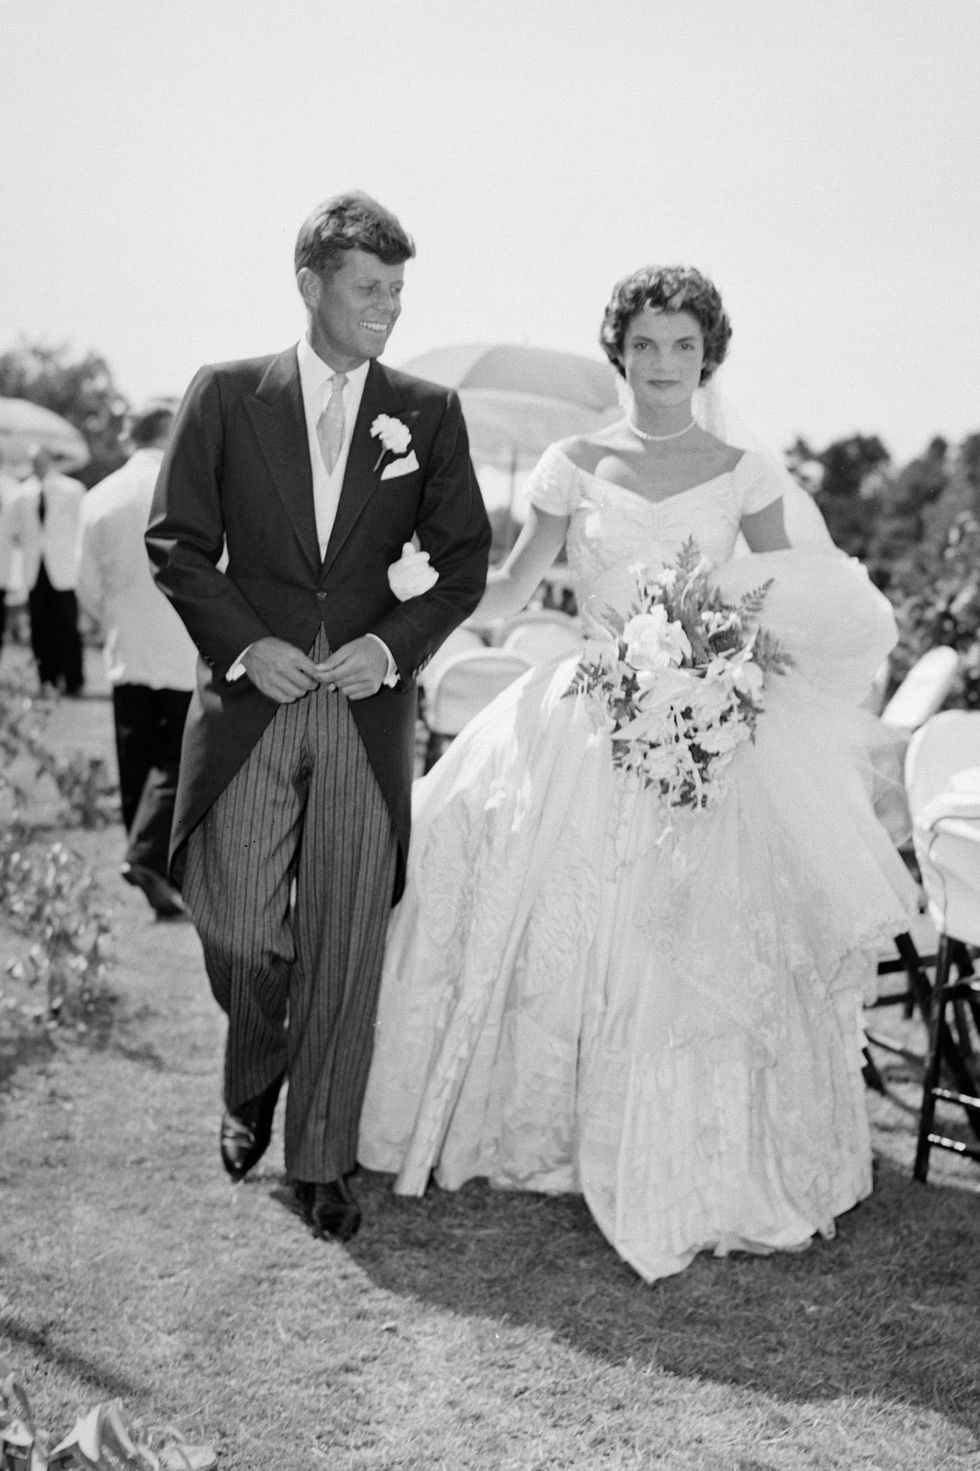 jfk and jackie kennedy at their wedding